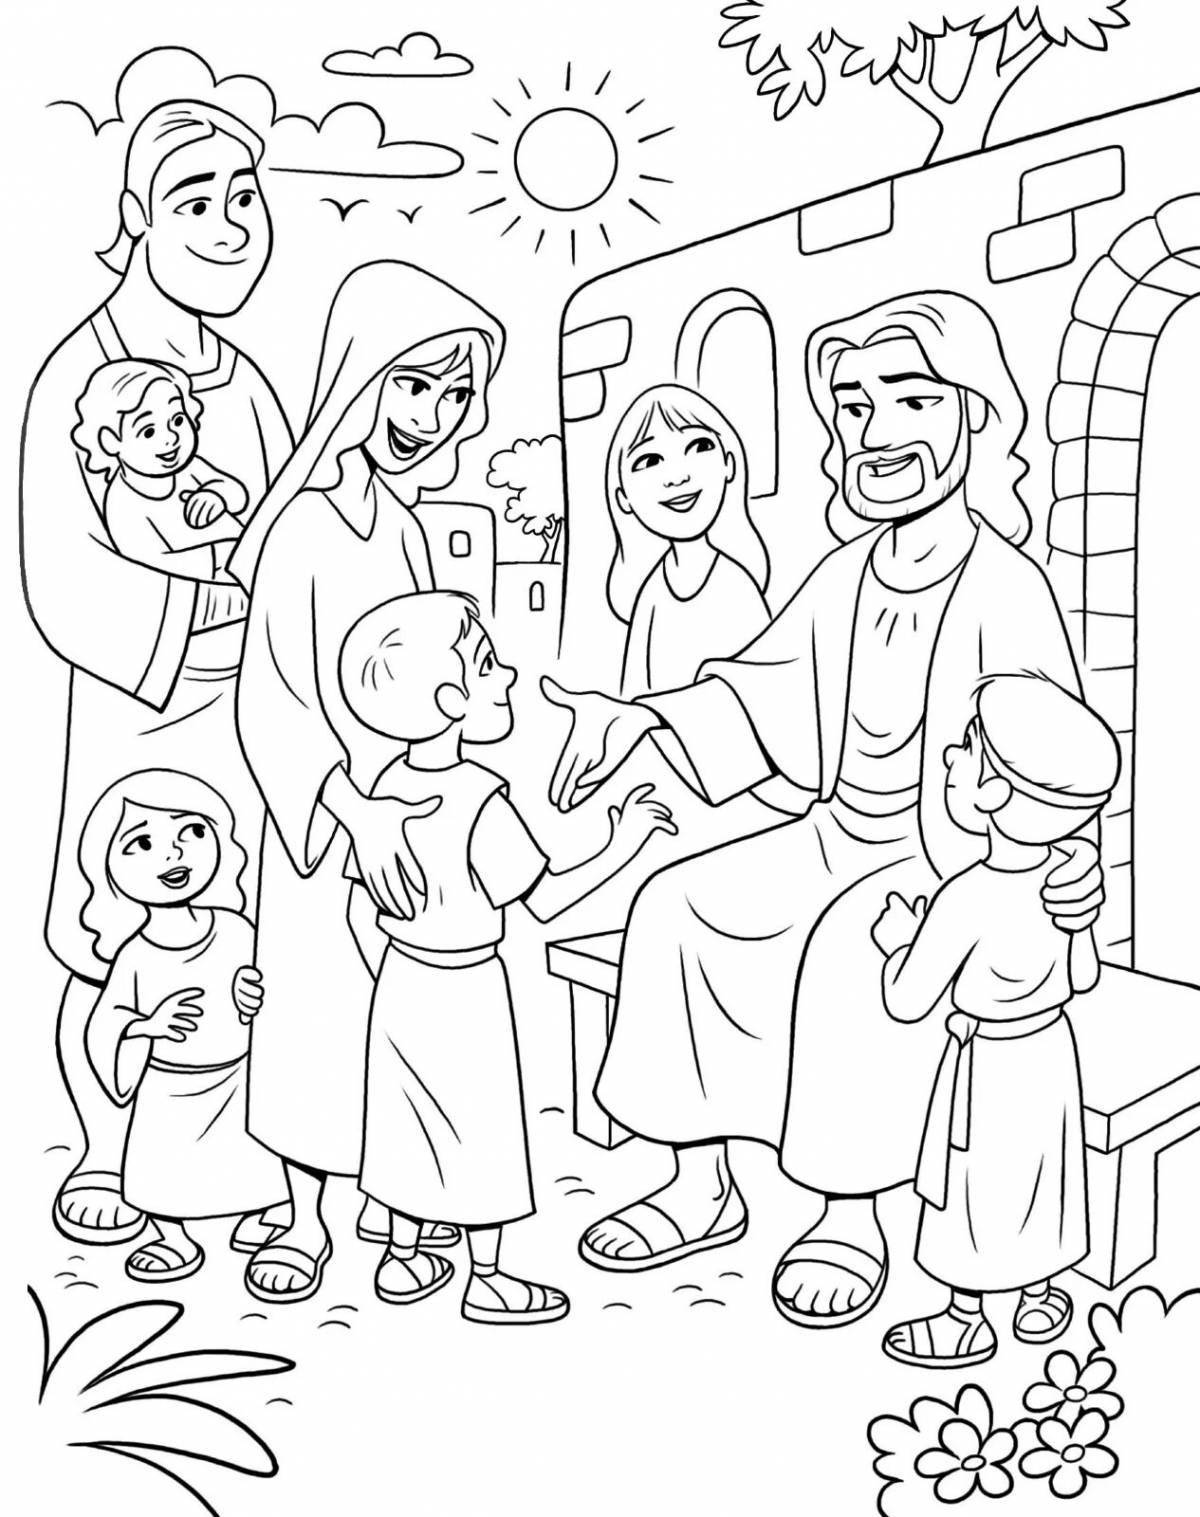 Coloring book peaceful jesus for kids